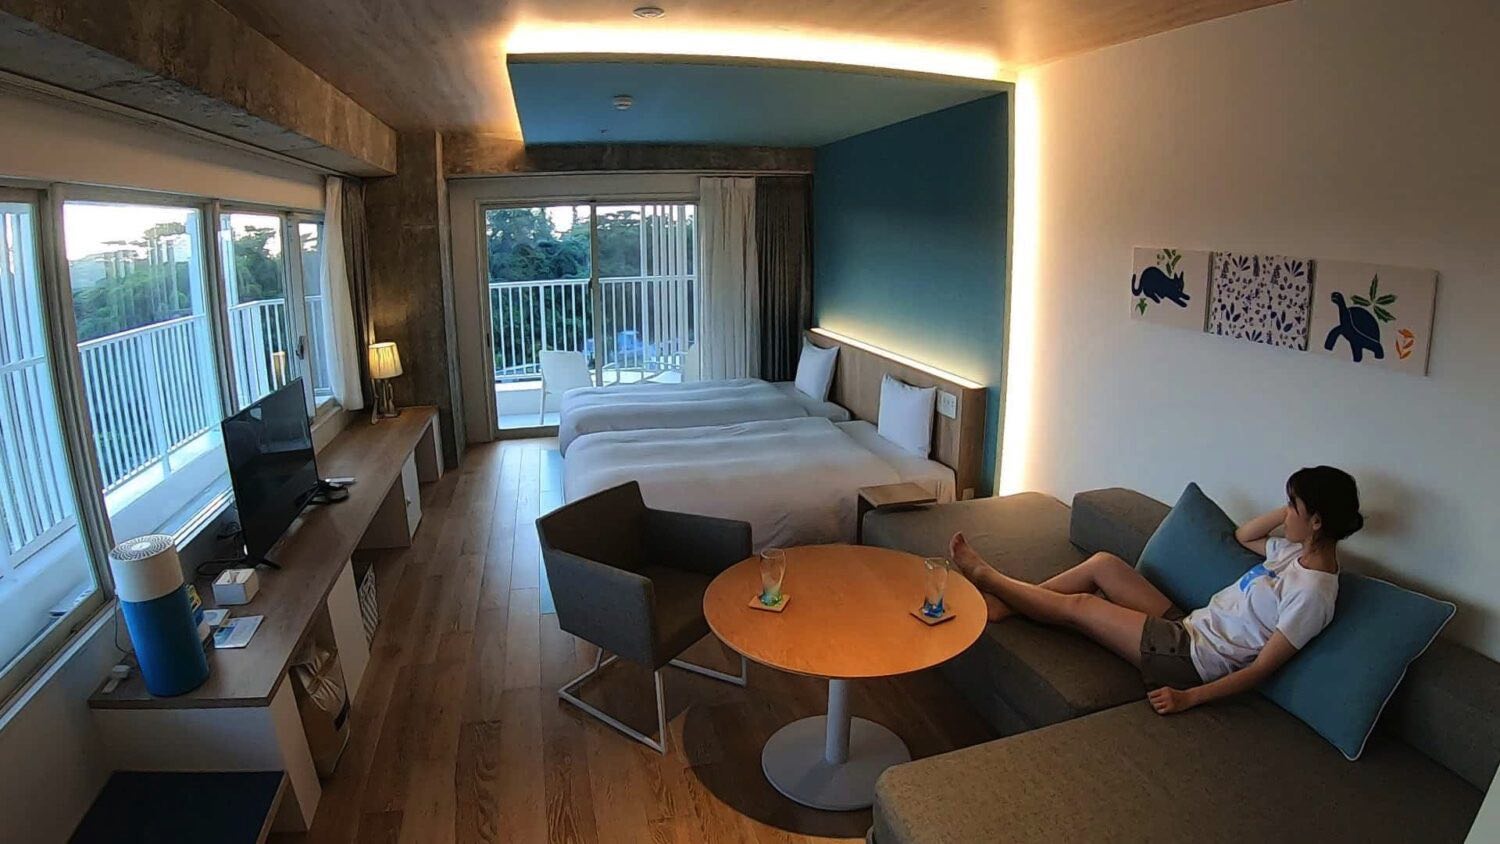 Check in at Hoshino Resort BEB5 Okinawa Seragaki! Relax in a spacious room with kitchen and washer/dryer. The infinity pool has a resort-like atmosphere.